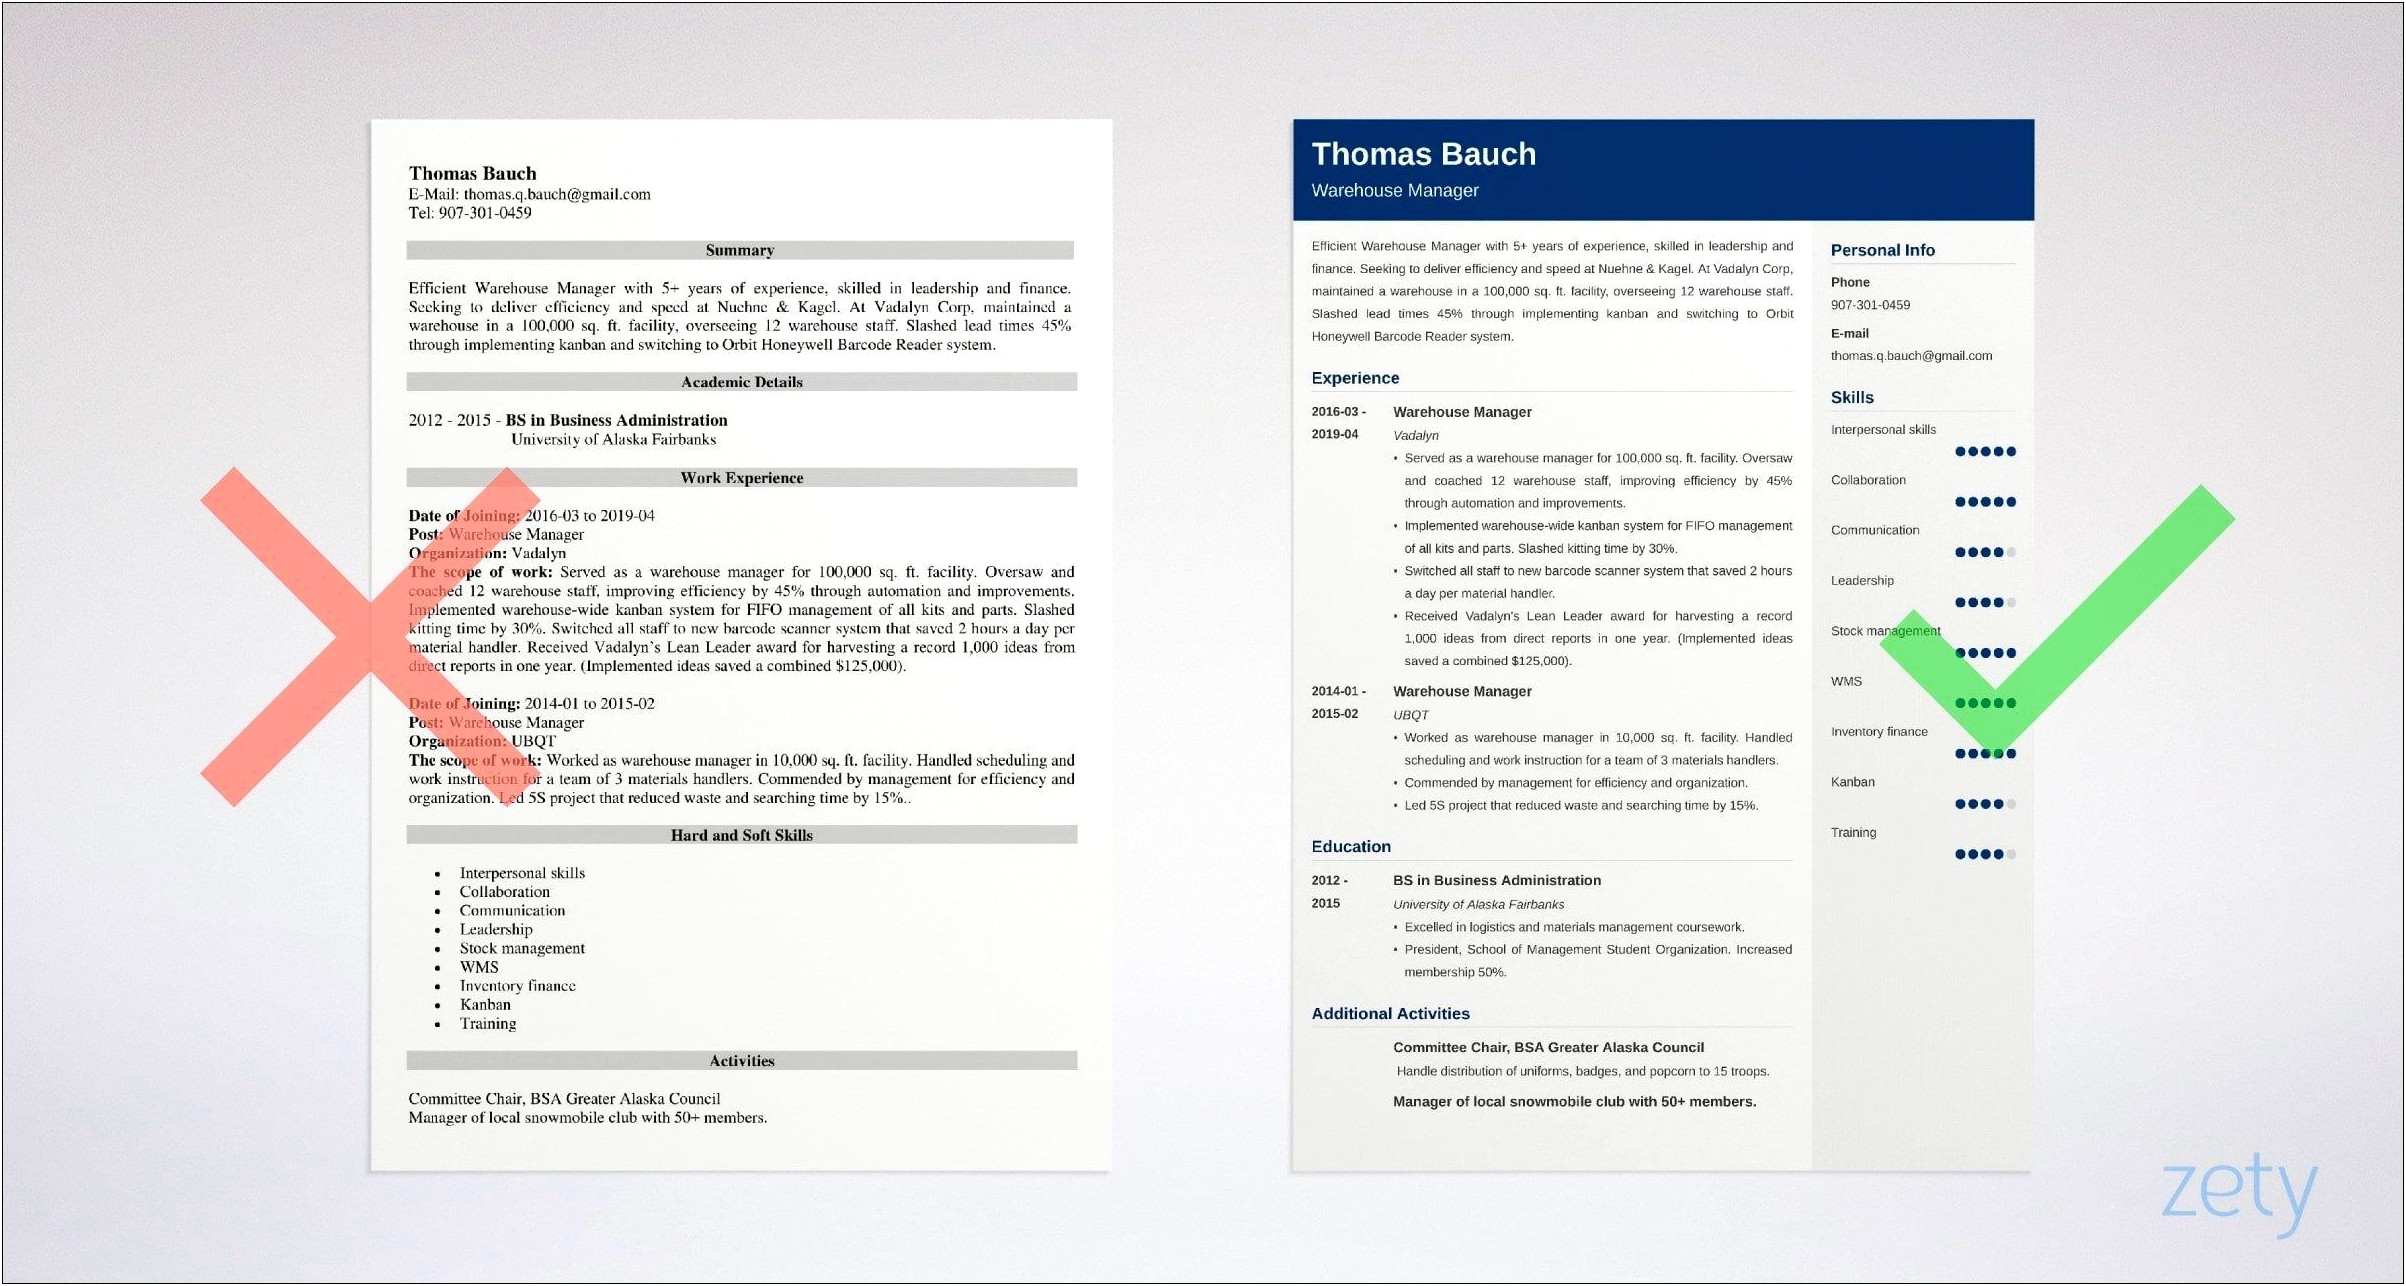 Best Looking Resume Template For 2019 Logistics Analyst